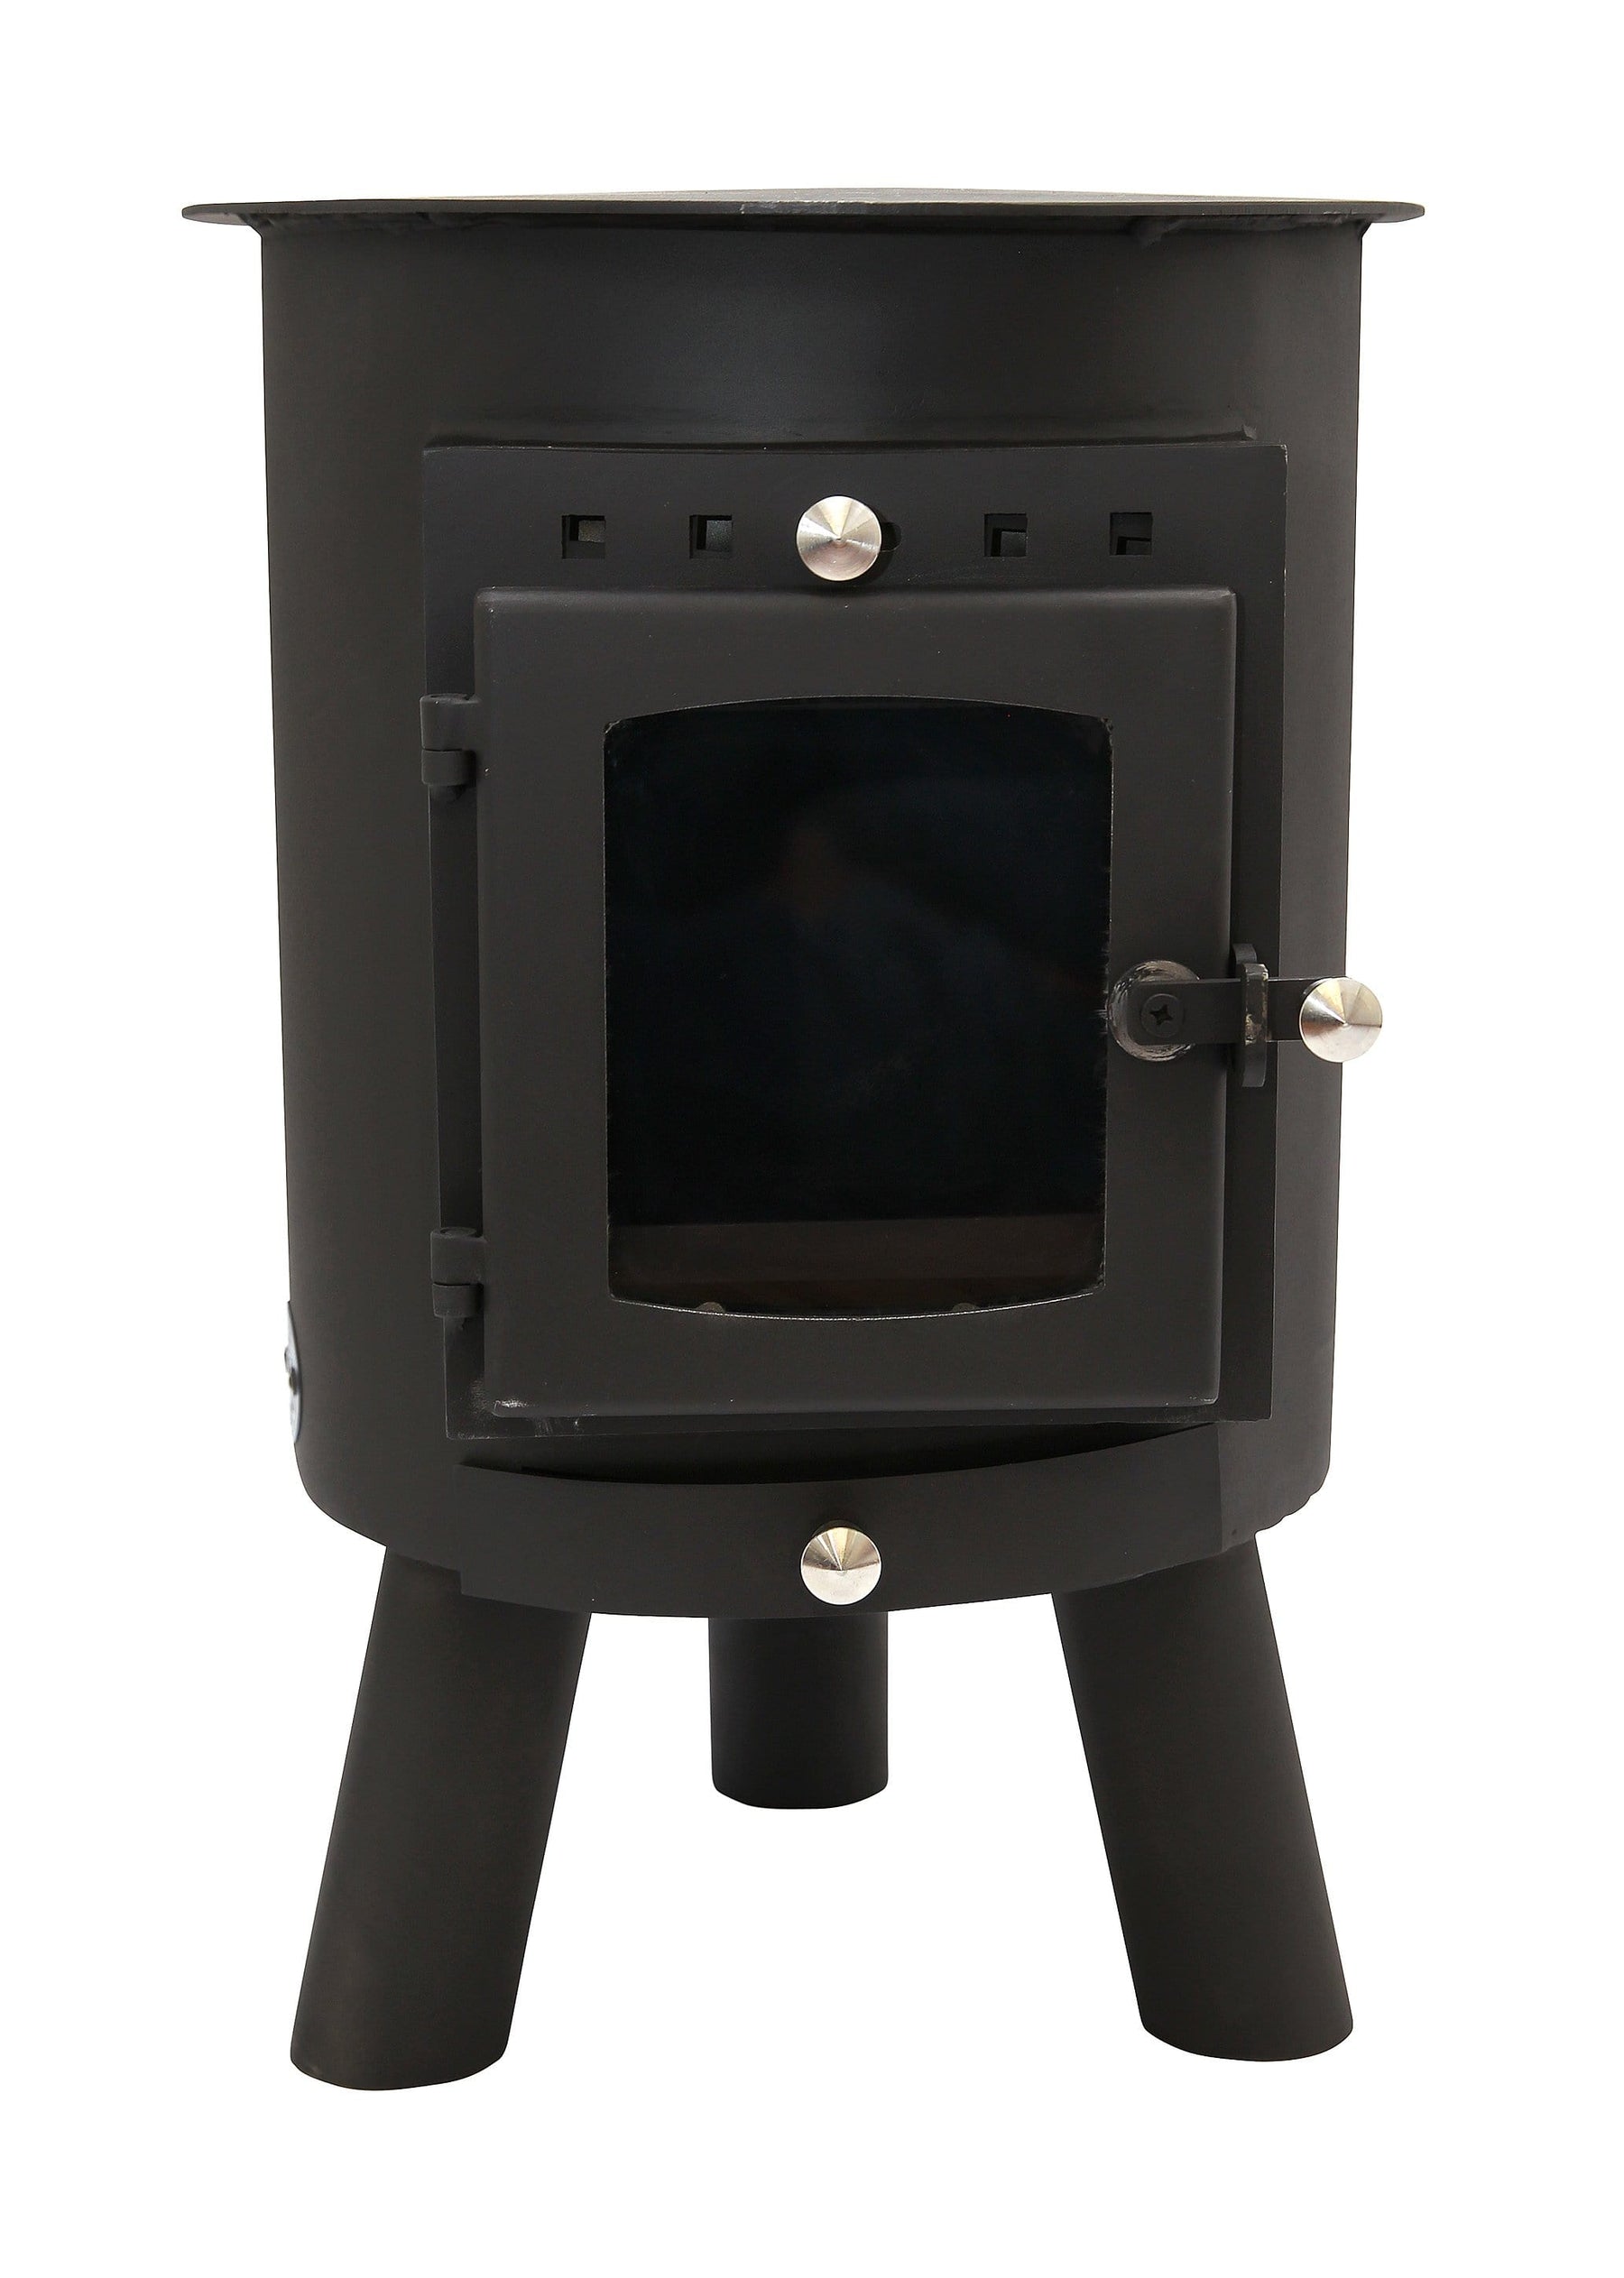 Outbacker® Hygge Oval Stove & Water Boiler Package